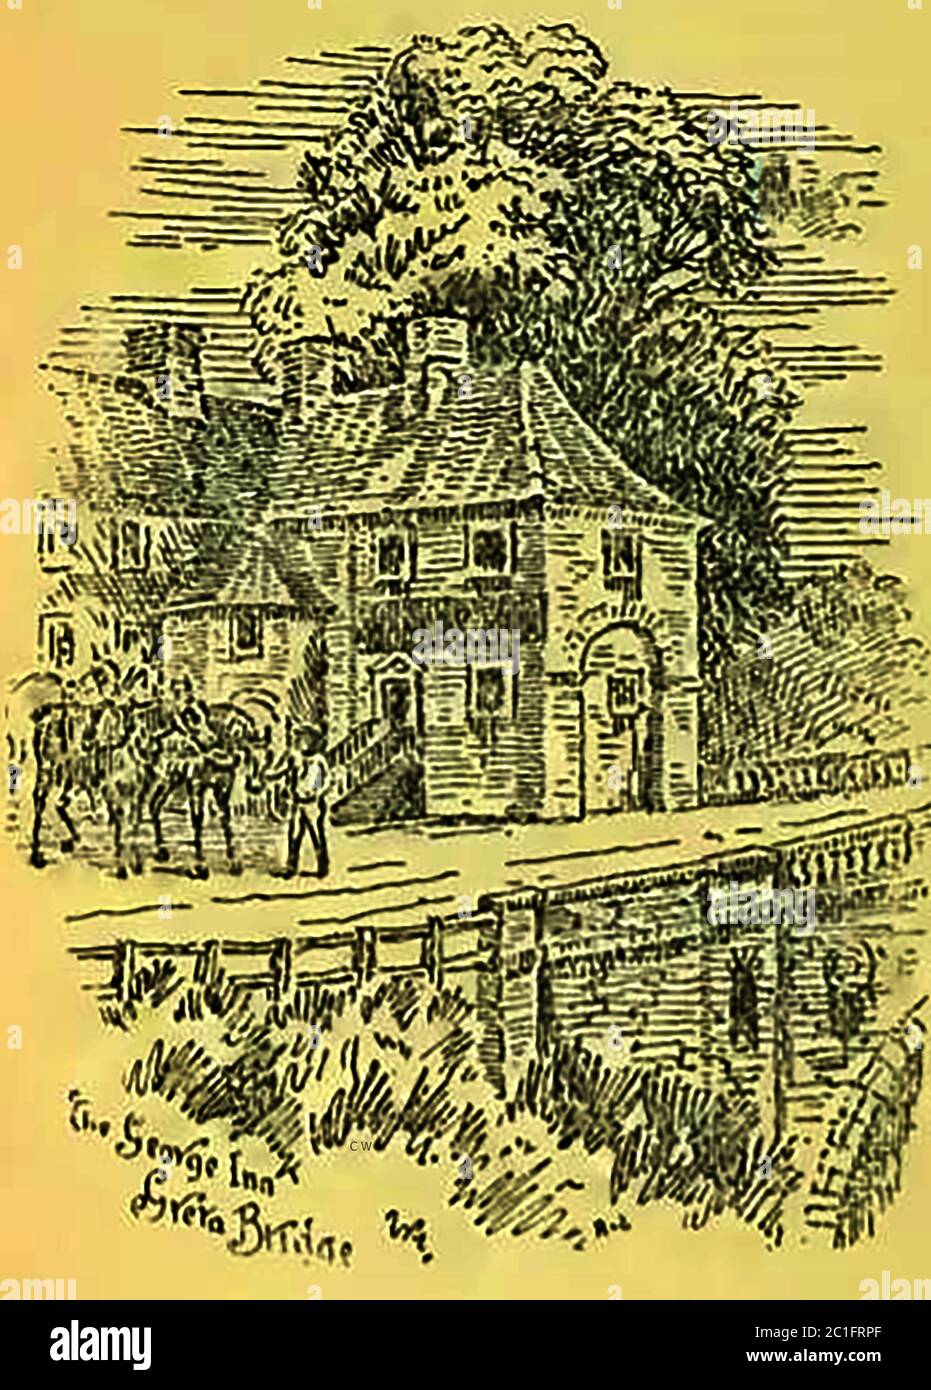 An historic sketch of the George Inn, (landlord Mr Ferguson) Greta Bridge, UK. Used by  horses as a coach stop in the coaching era. The Inn was made famous by Charles Dickens as the house where Mr. Wackford Squeers, Nicholas Nickleby, and the boys were set down after their journey from London to Dotheboys Hall. Another Inn, the New Inn, stood half a mile away. Stock Photo